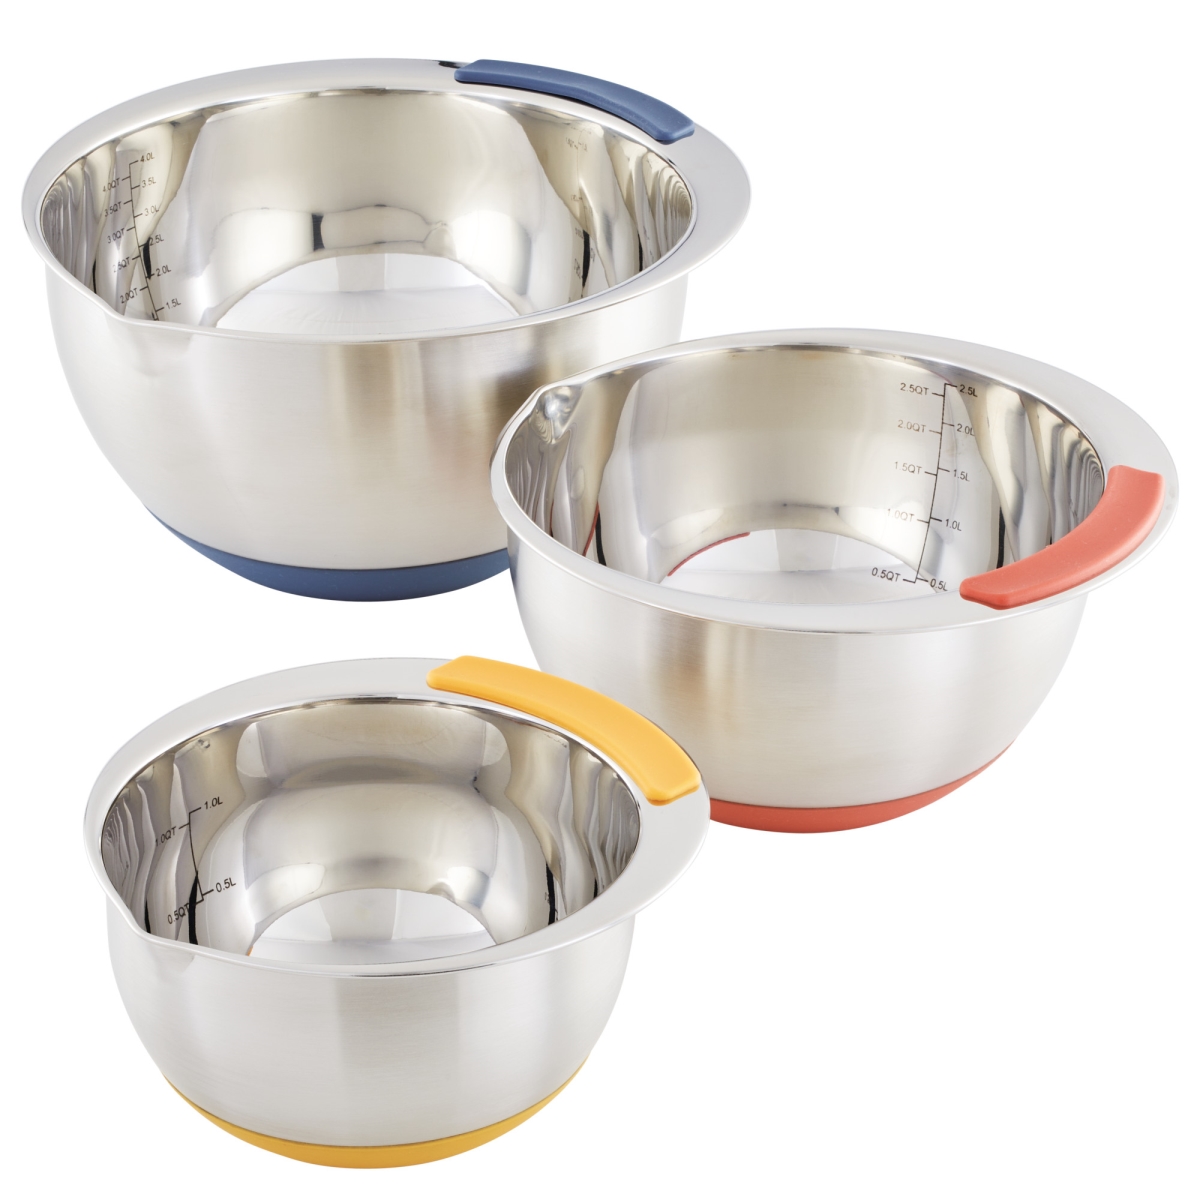 Picture of Ayesha Curry 48430 Pantryware Stainless Steel Nesting Mixing Bowls Set with Color Accent Handles, Silver - 3 Piece